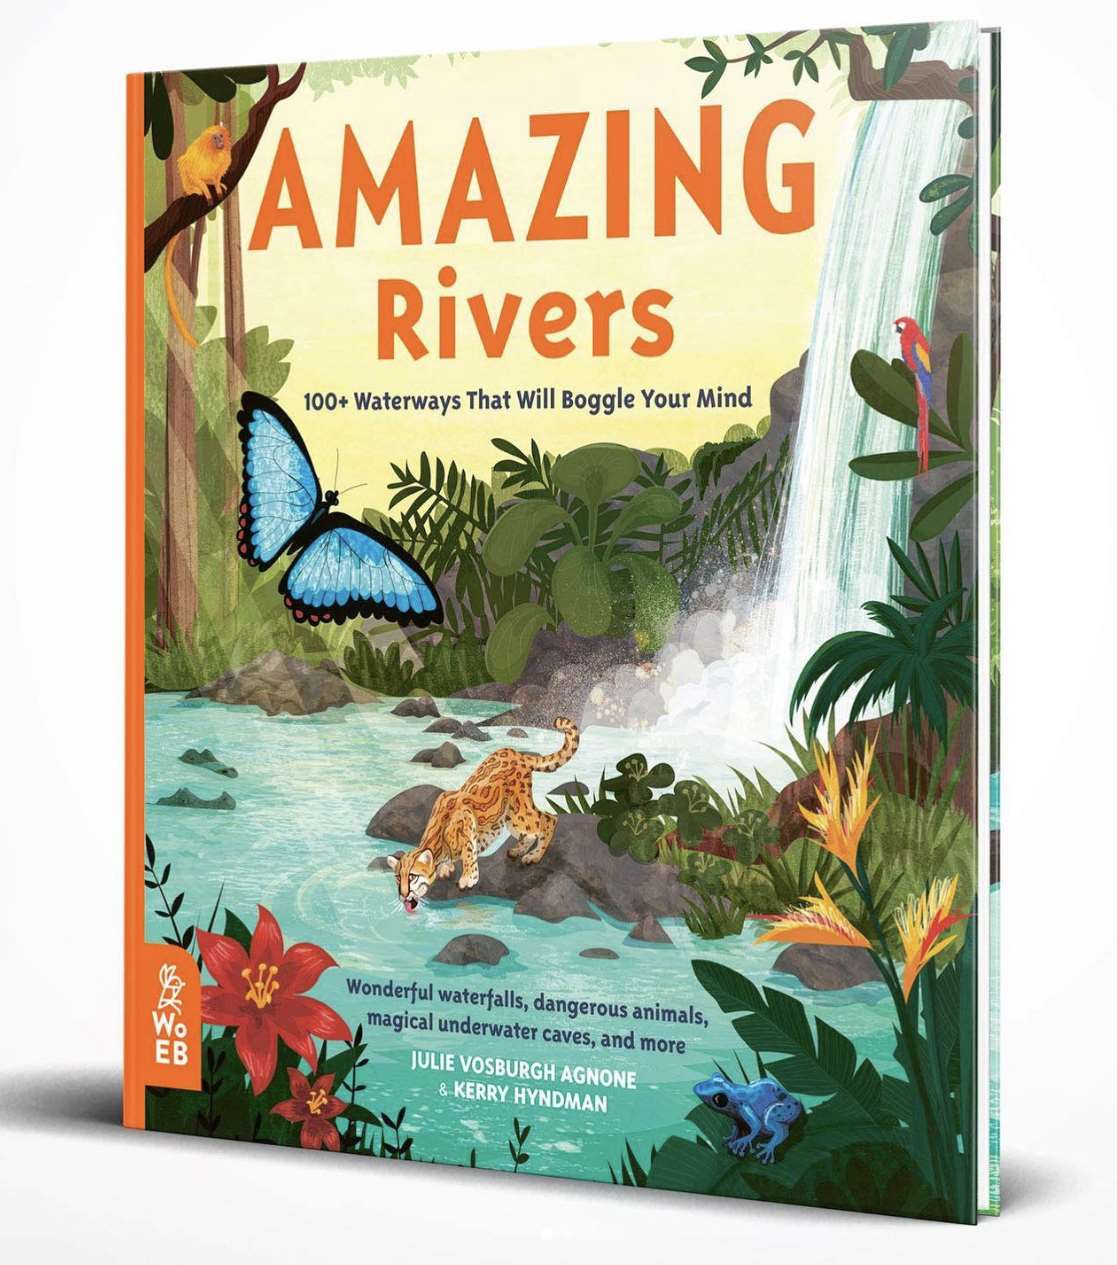 Kerry Hyndman, Amazing Rivers book cover by Kerry Hyndman featuring nature and rivers.